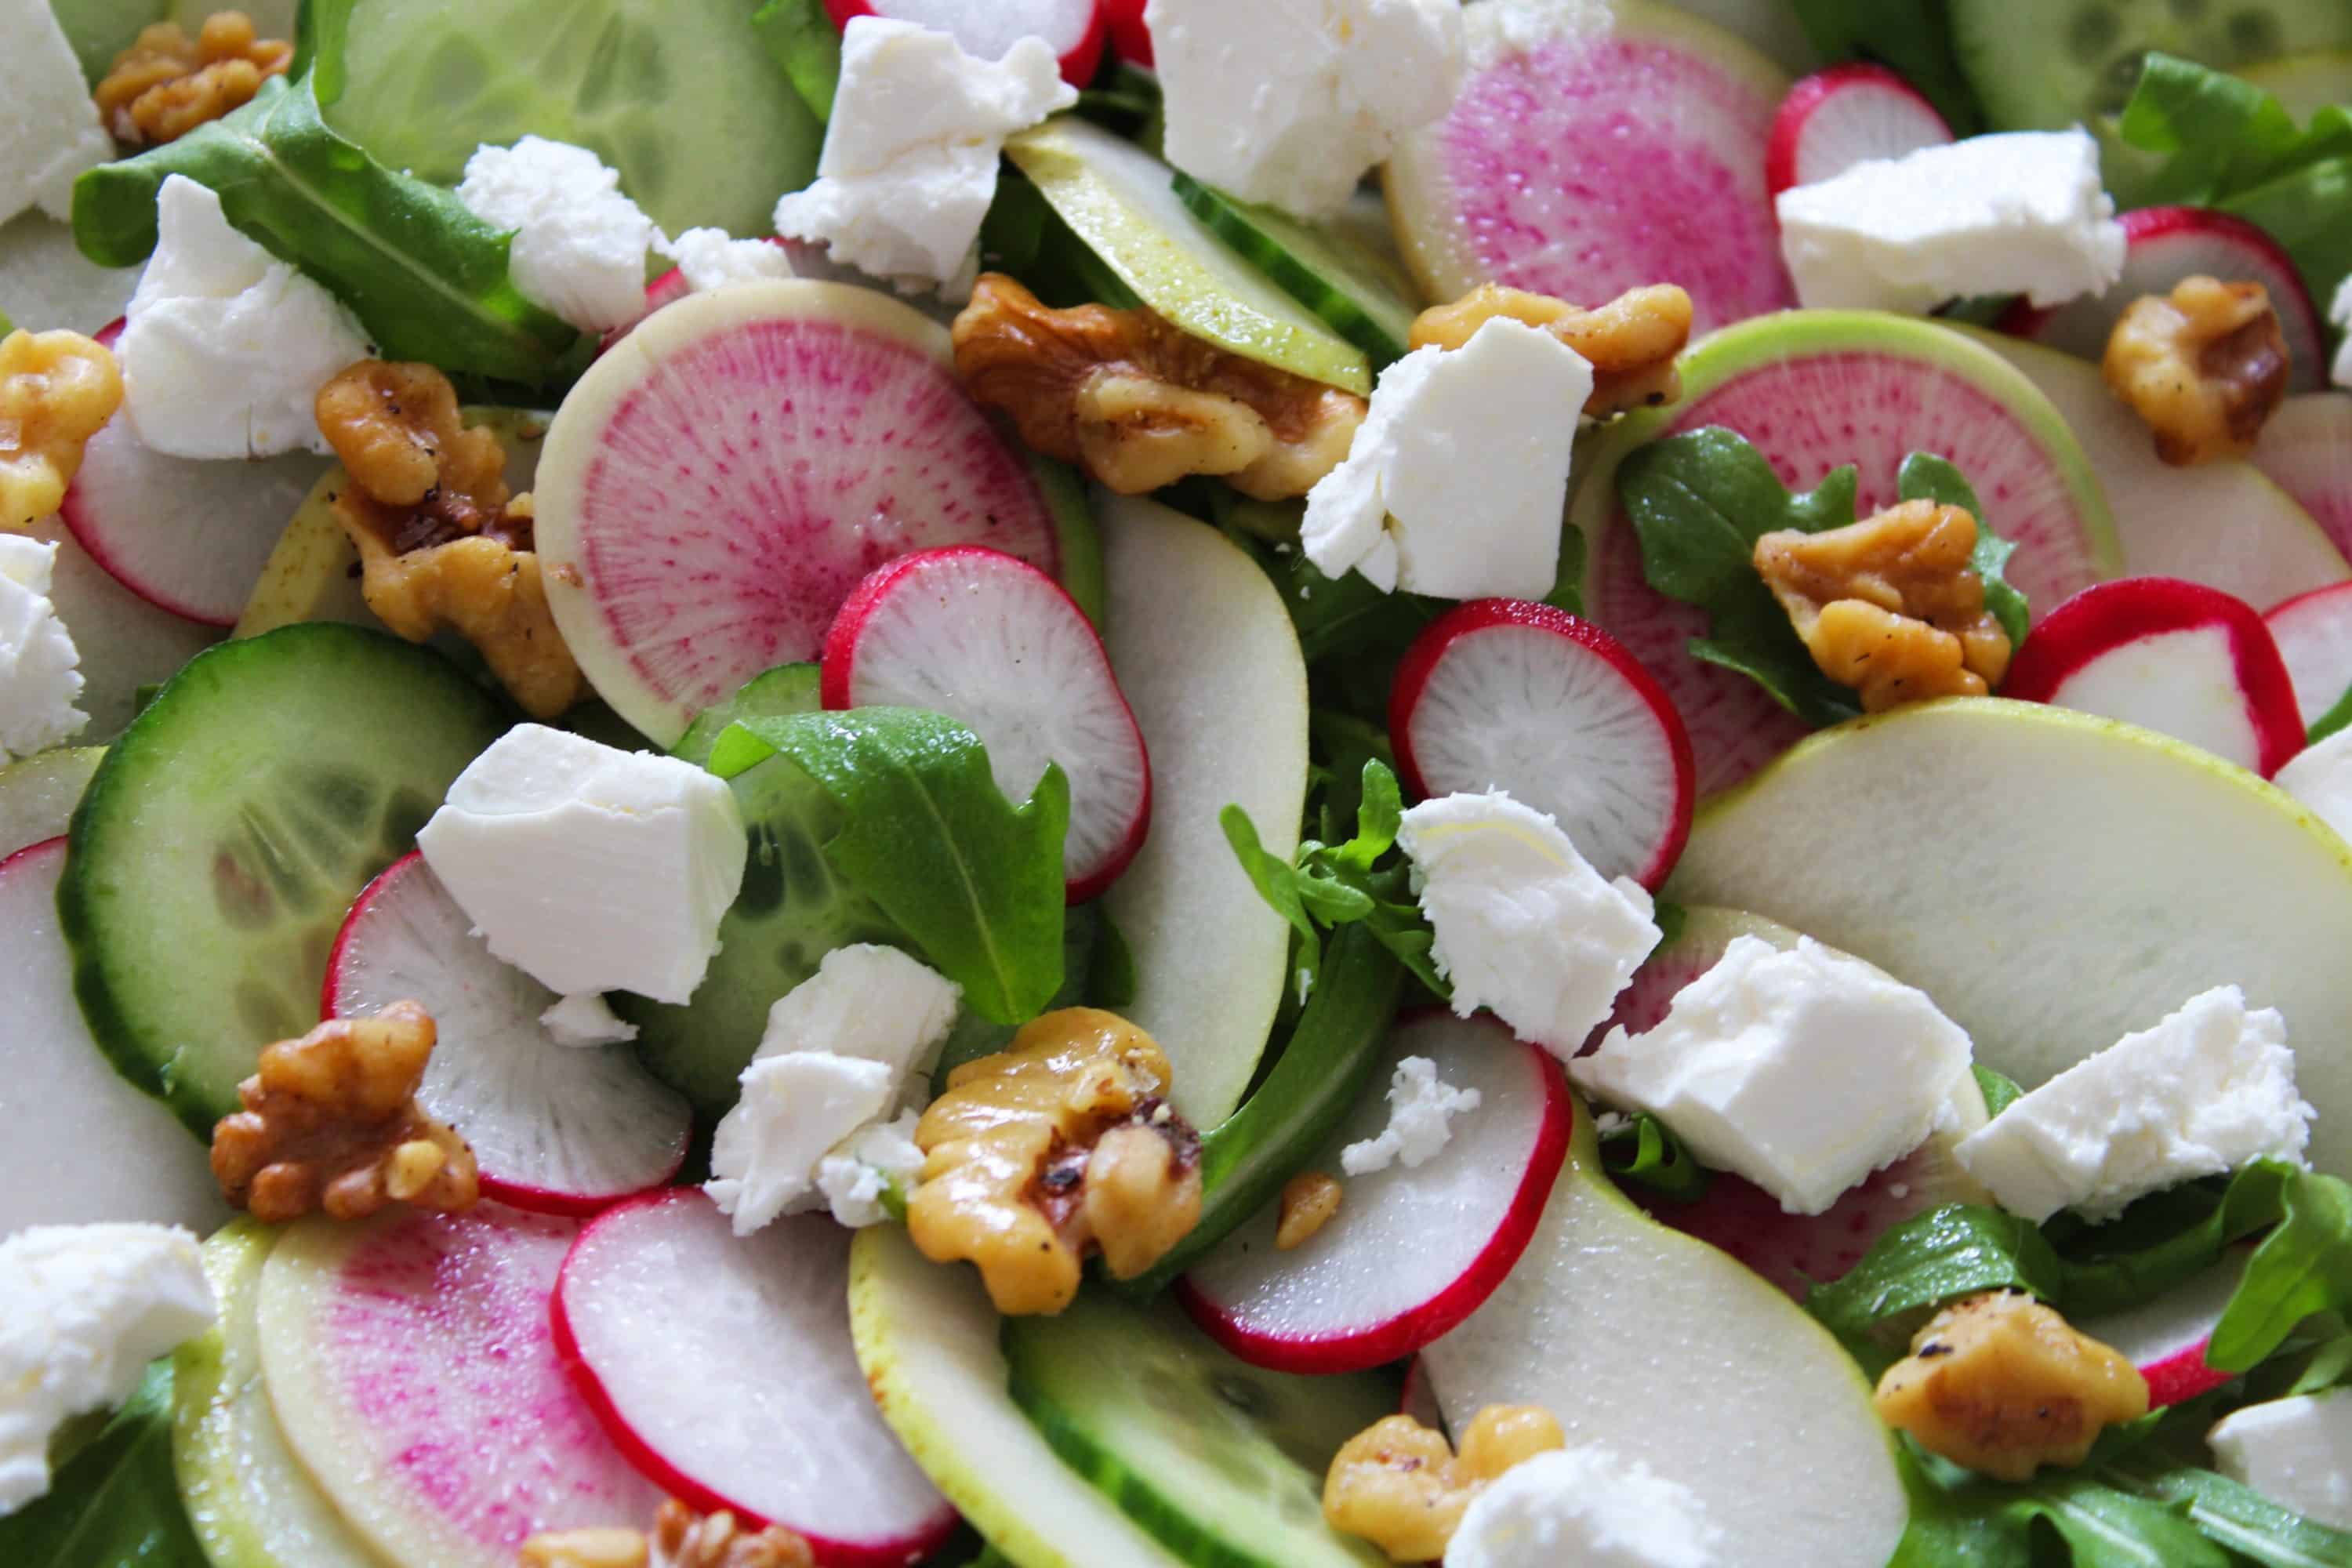 Radish, Feta and Cucumber Salad. A recipe by It's Not Complicated Recipes.